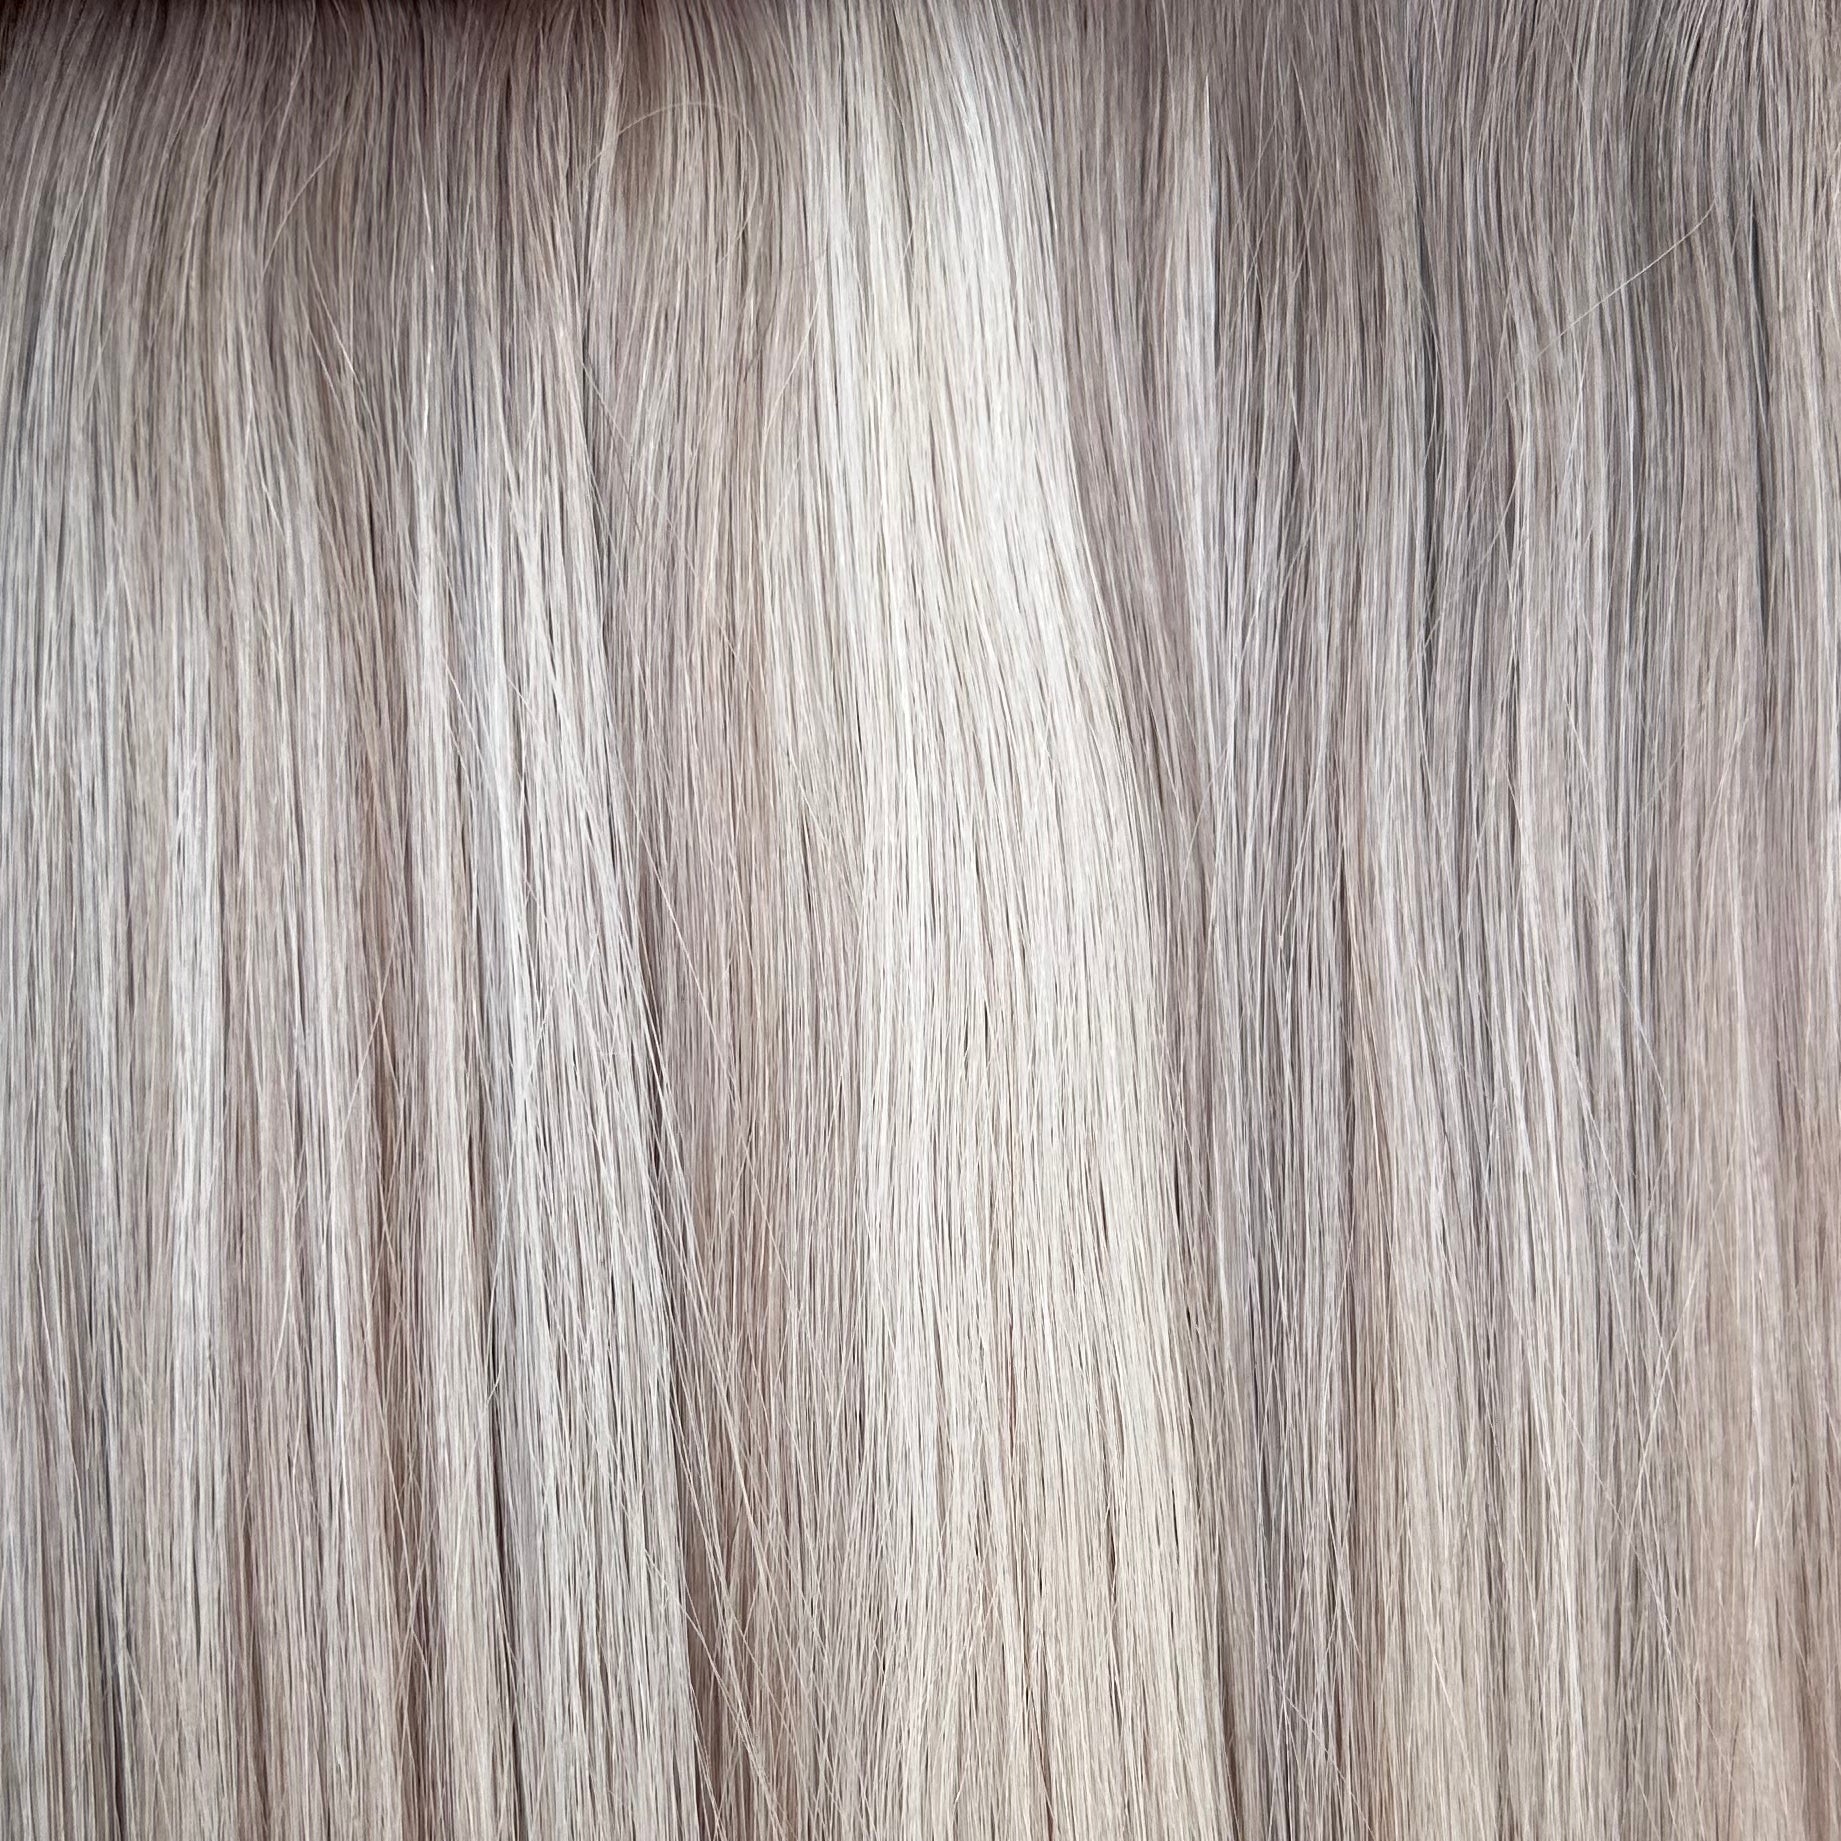 Rooted Iridescent Blonde Piano - InterMix Wefts